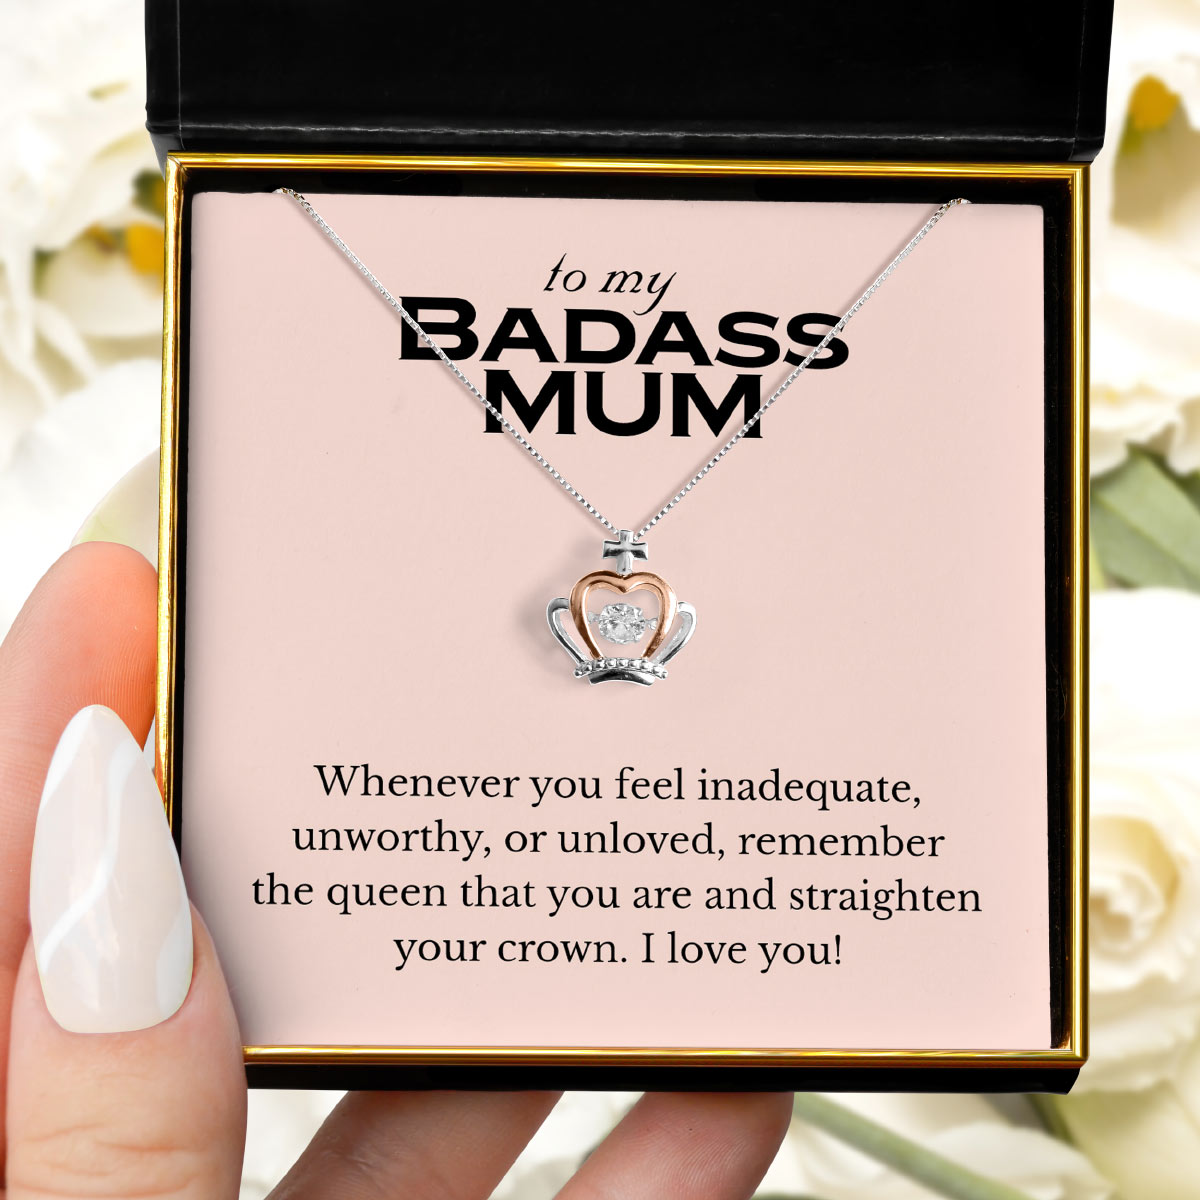 To My Badass Mum (Pink Edition) - Luxe Crown Necklace Gift Set